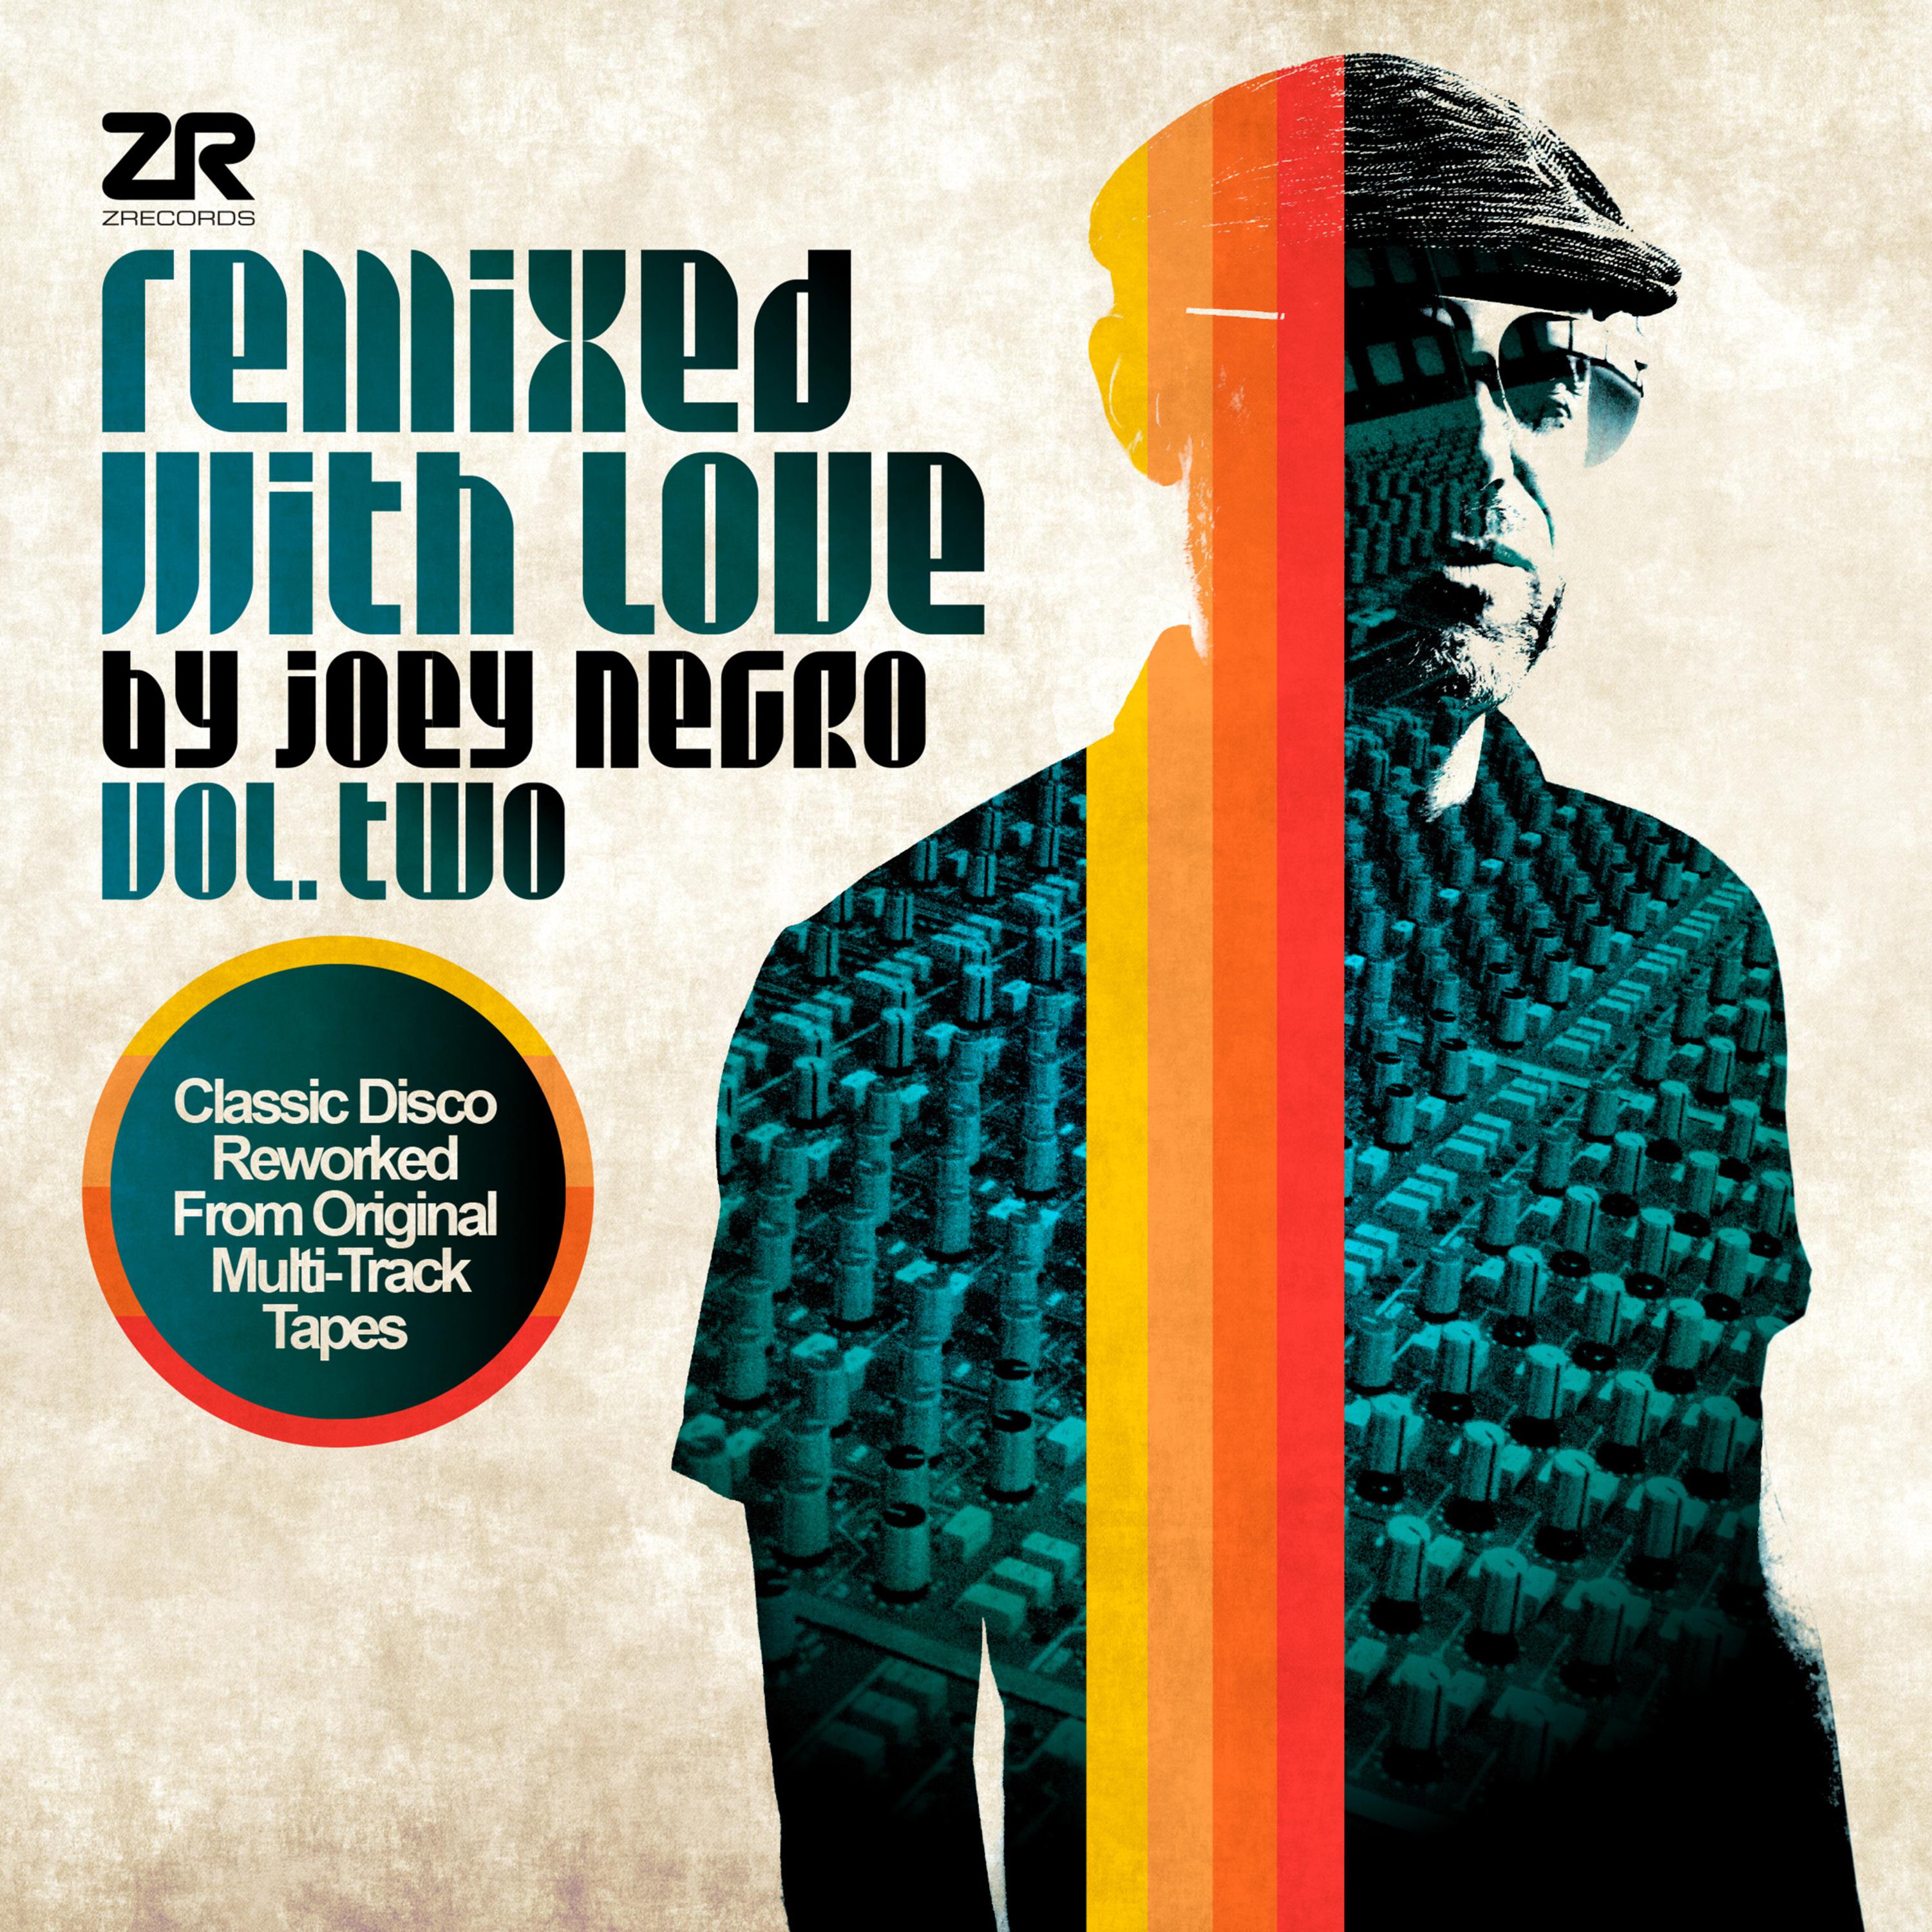 Make Room for Me (Joey Negro Disco Boogie Dub Extravaganza)